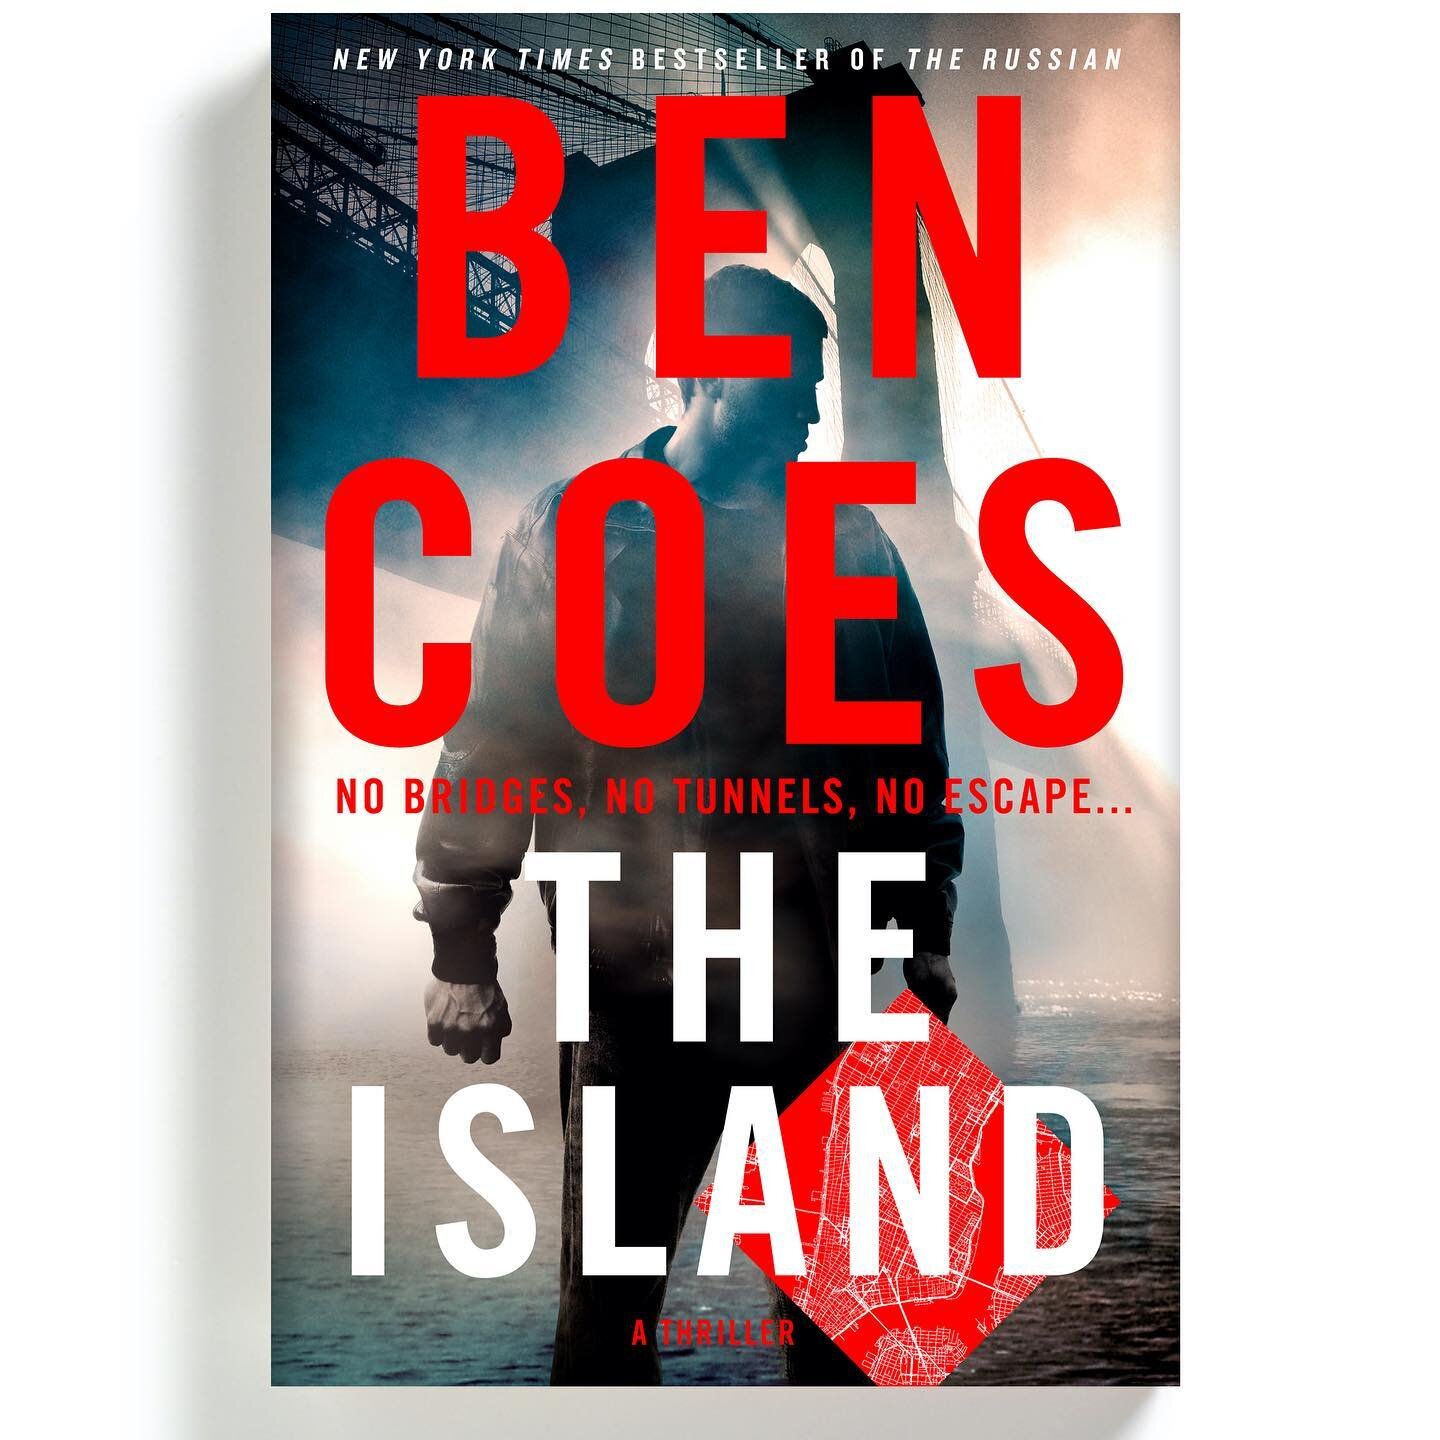 The Island is coming!

http://bit.ly/bencoes